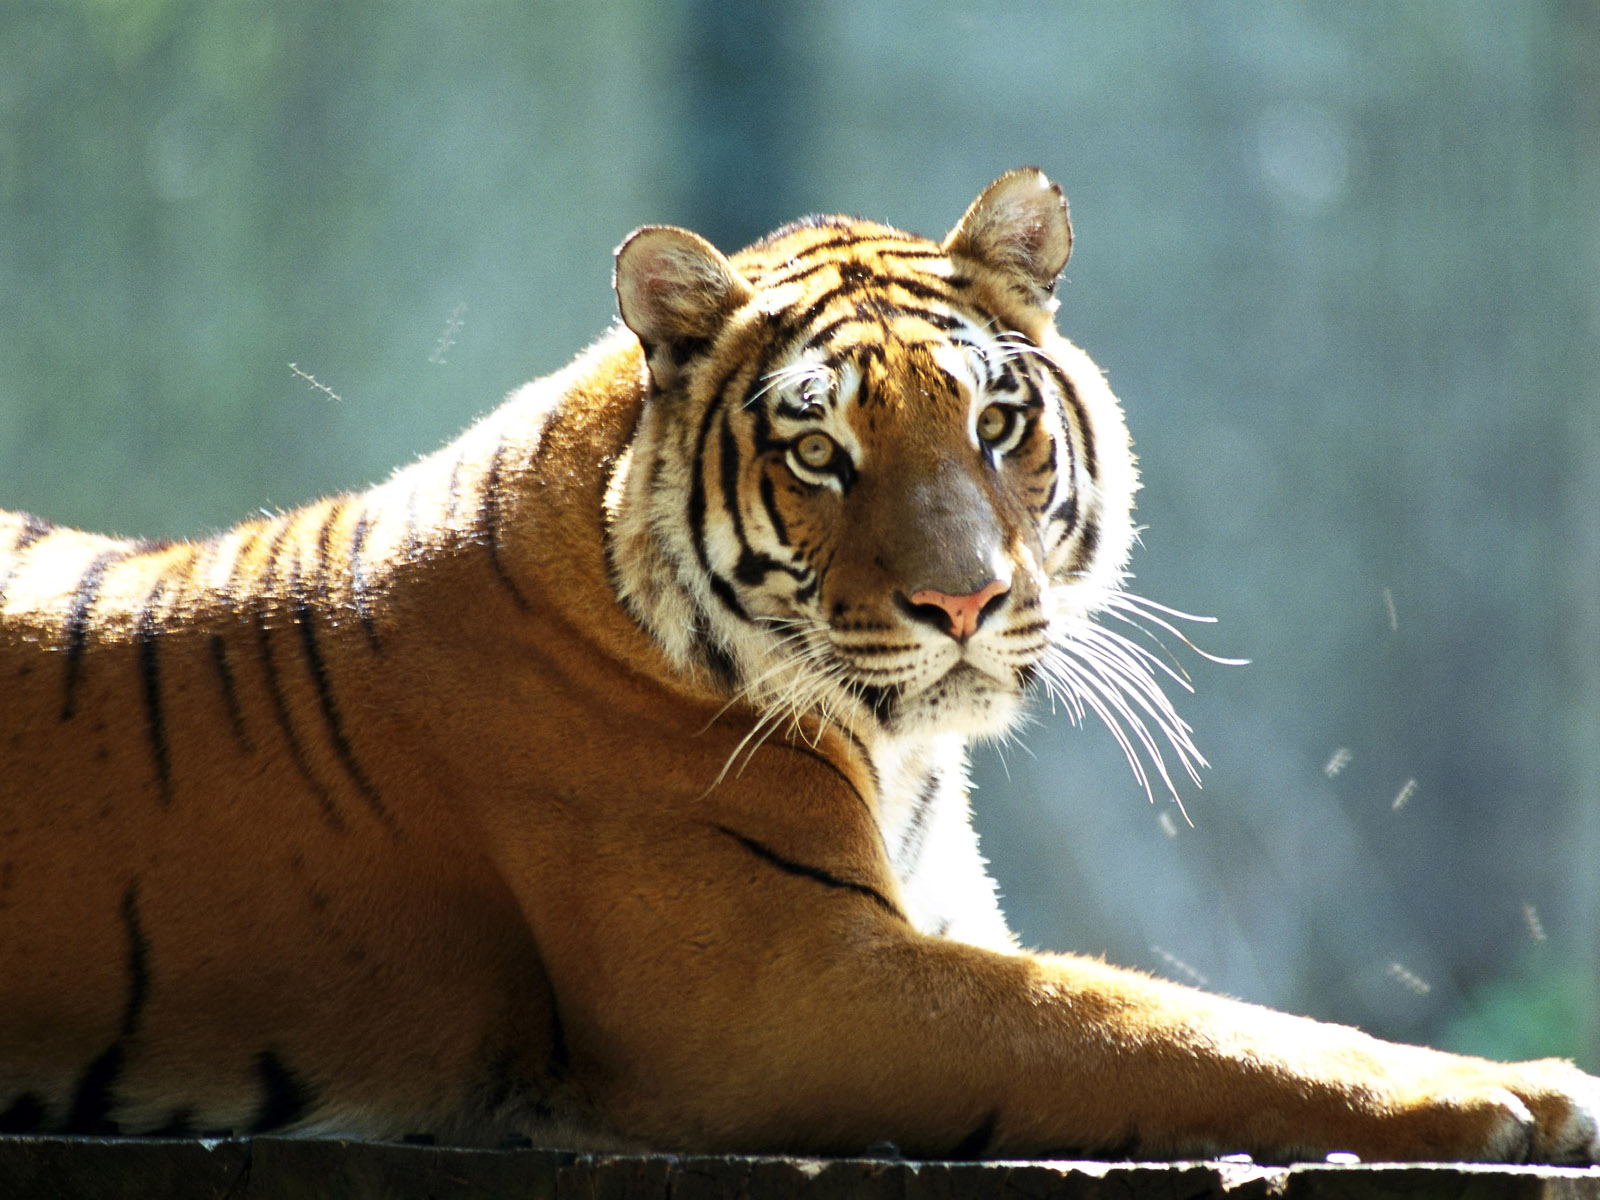 Animals Wallpapers Pack - Tiger Lying Down Side View - HD Wallpaper 